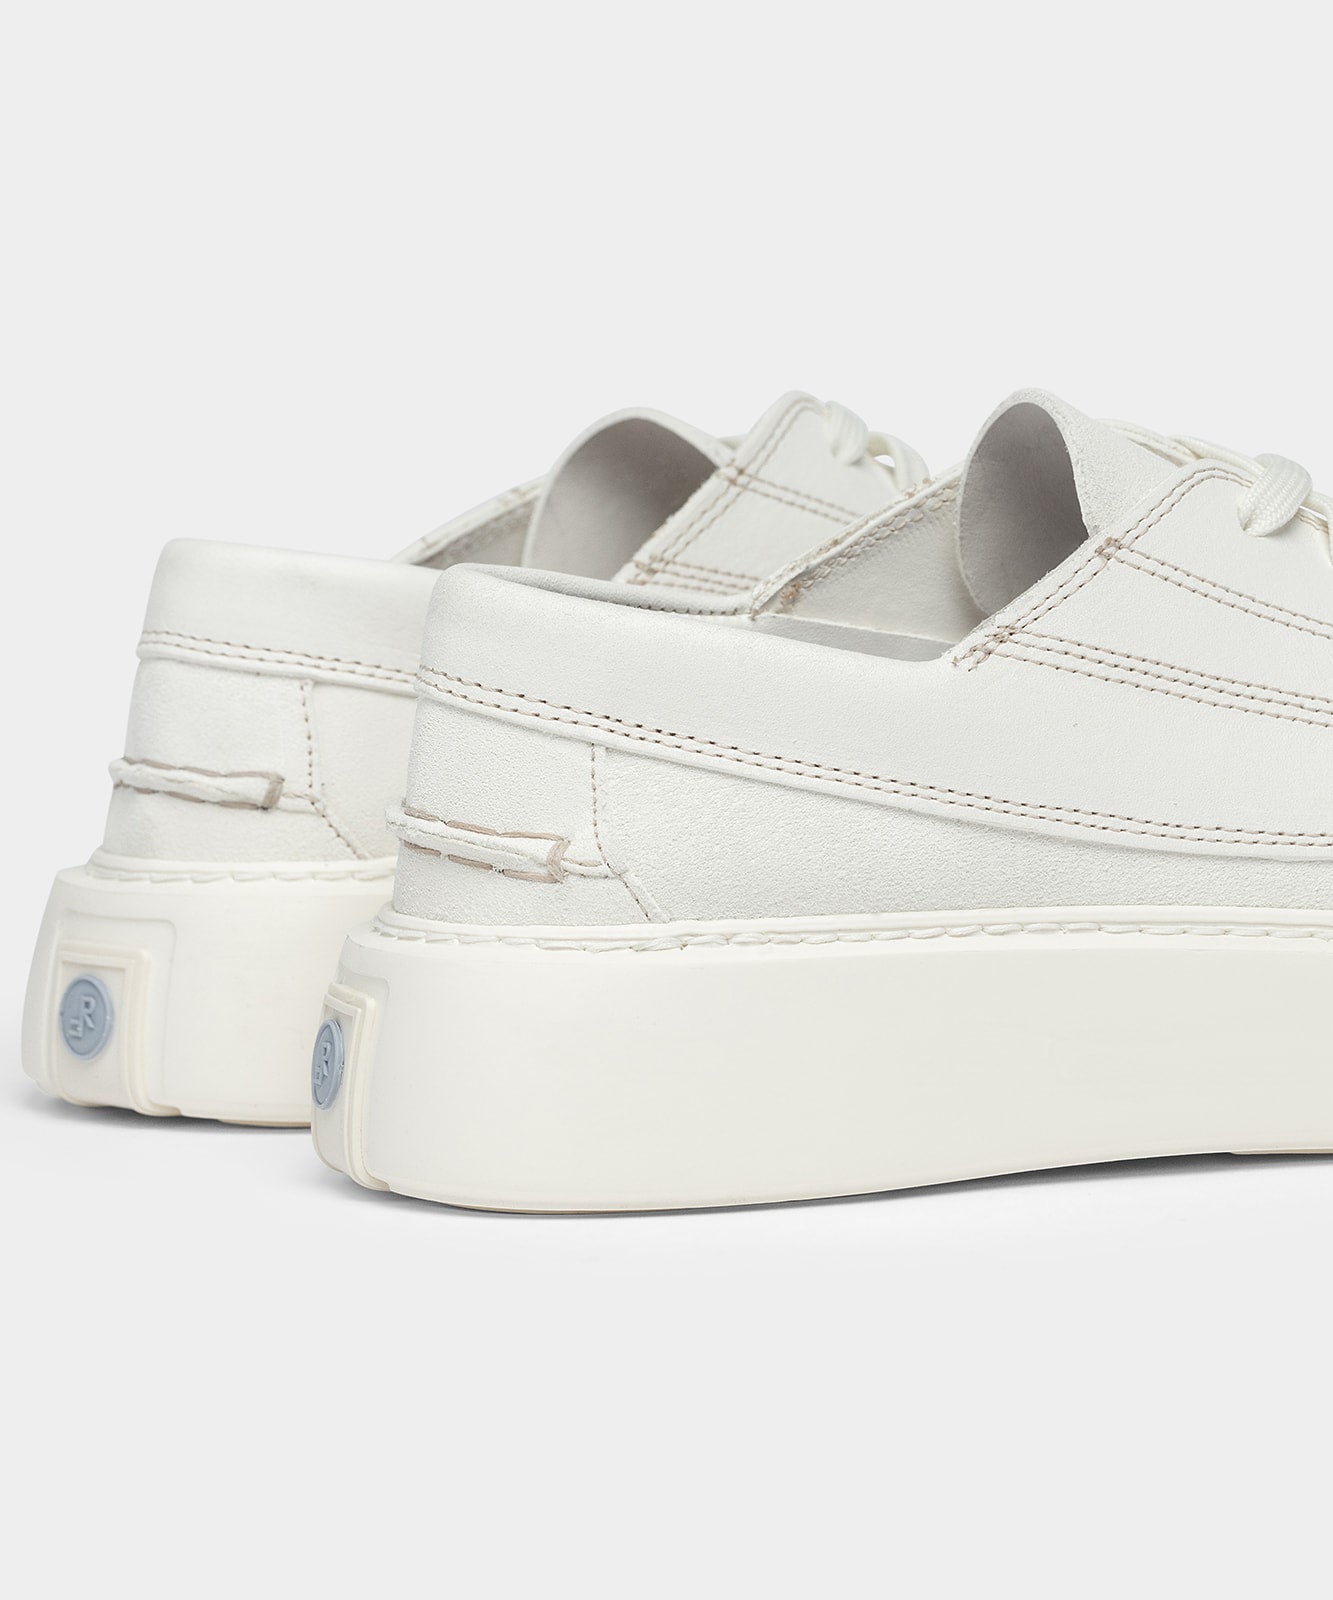 Tahoe Moc White Suede